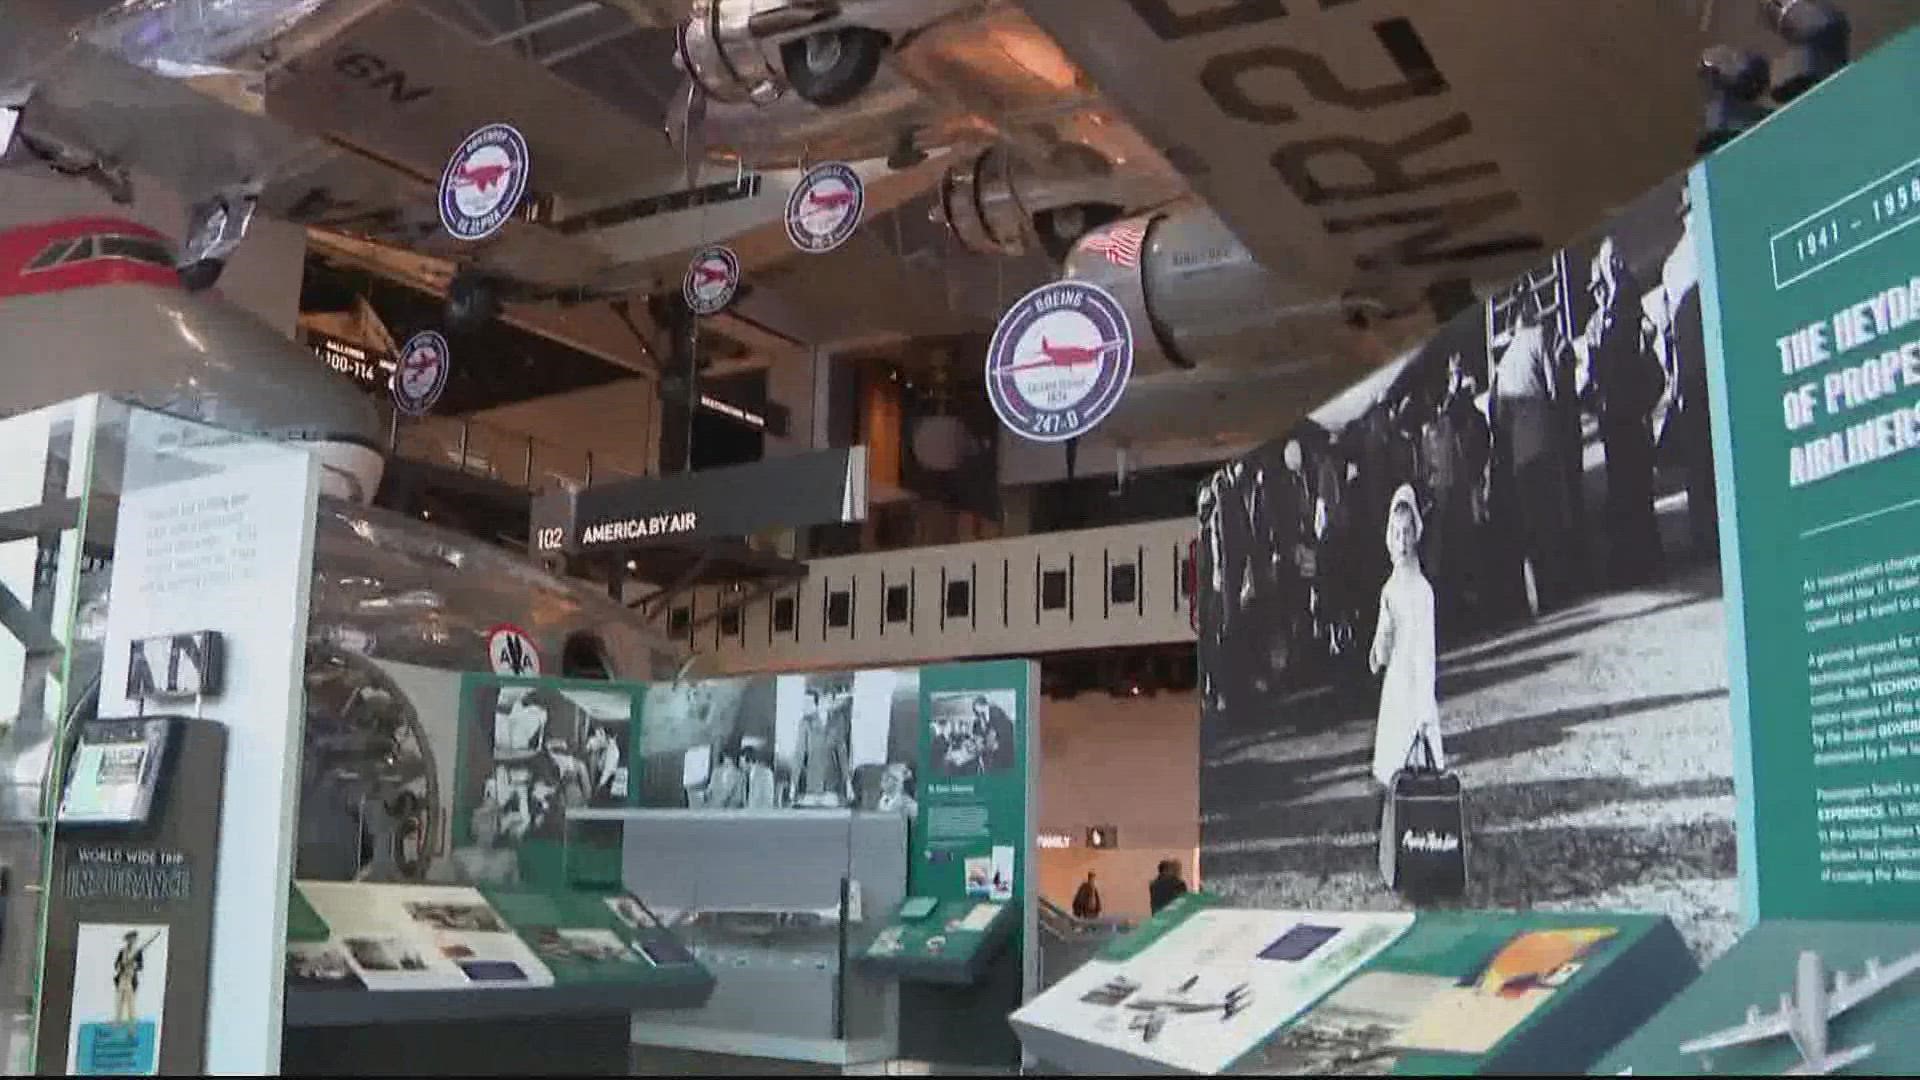 The Smithsonian Air and Space Museum reopens  Friday, Oct. 14th with new exhibits.